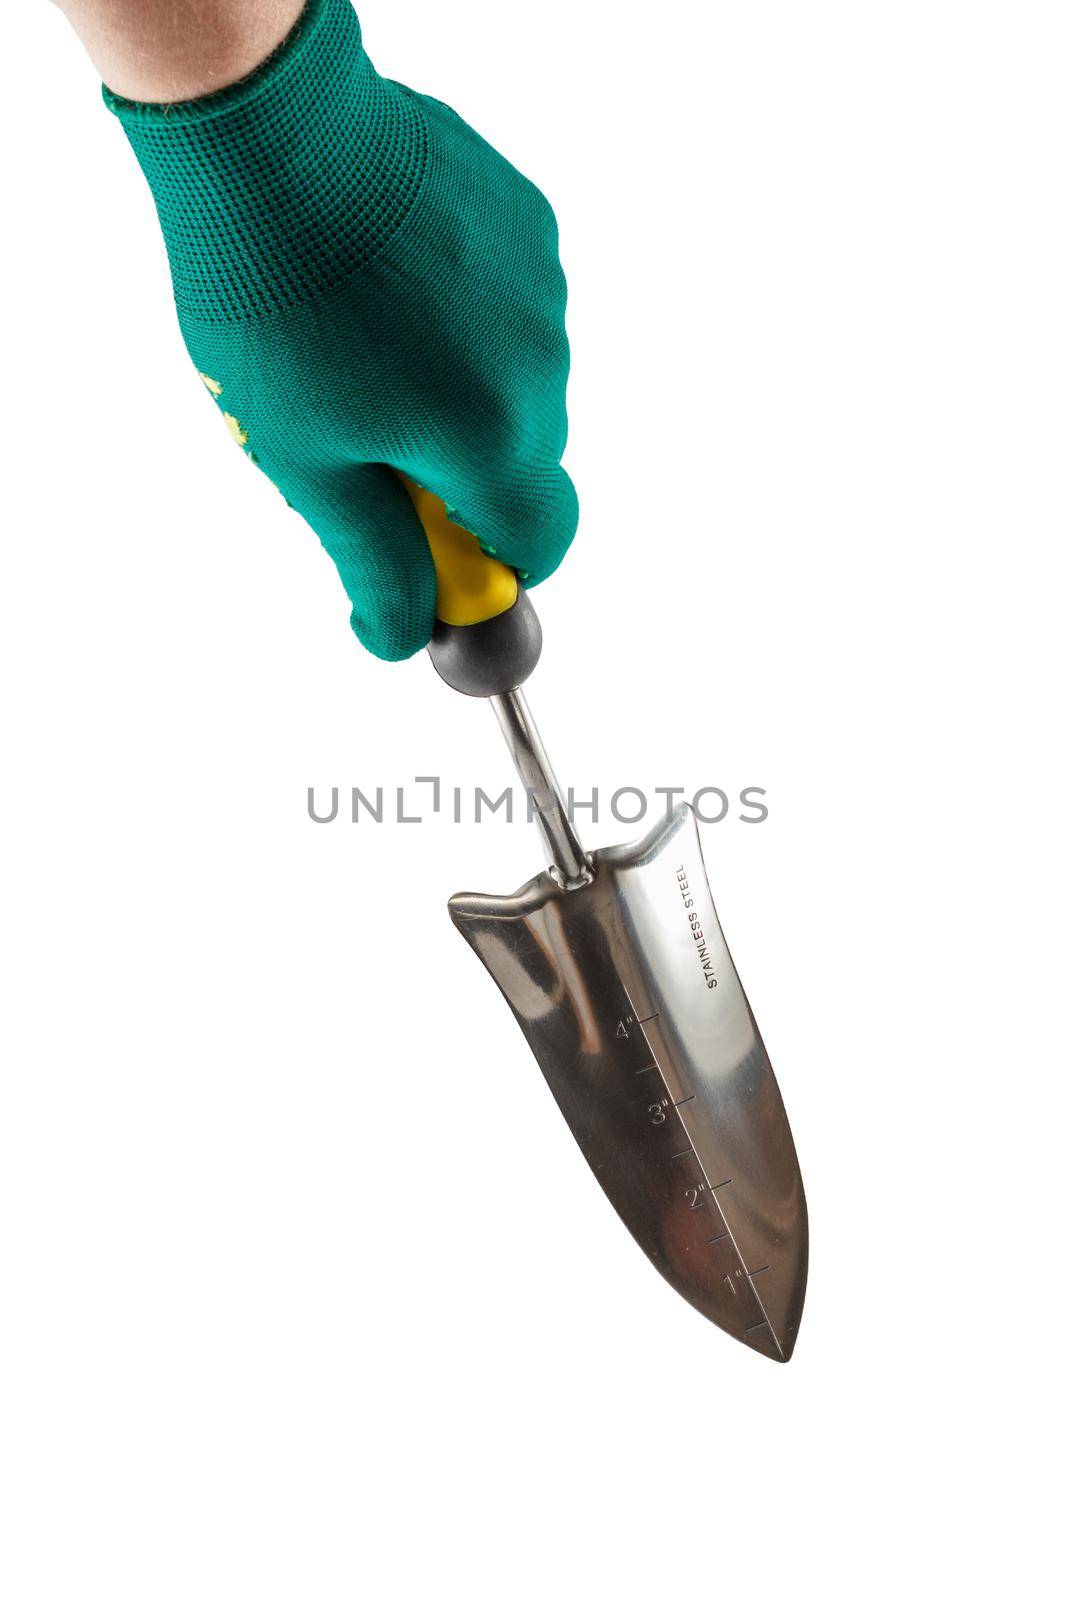 Small garden trowel in hand dressed in a green glove isolated on white